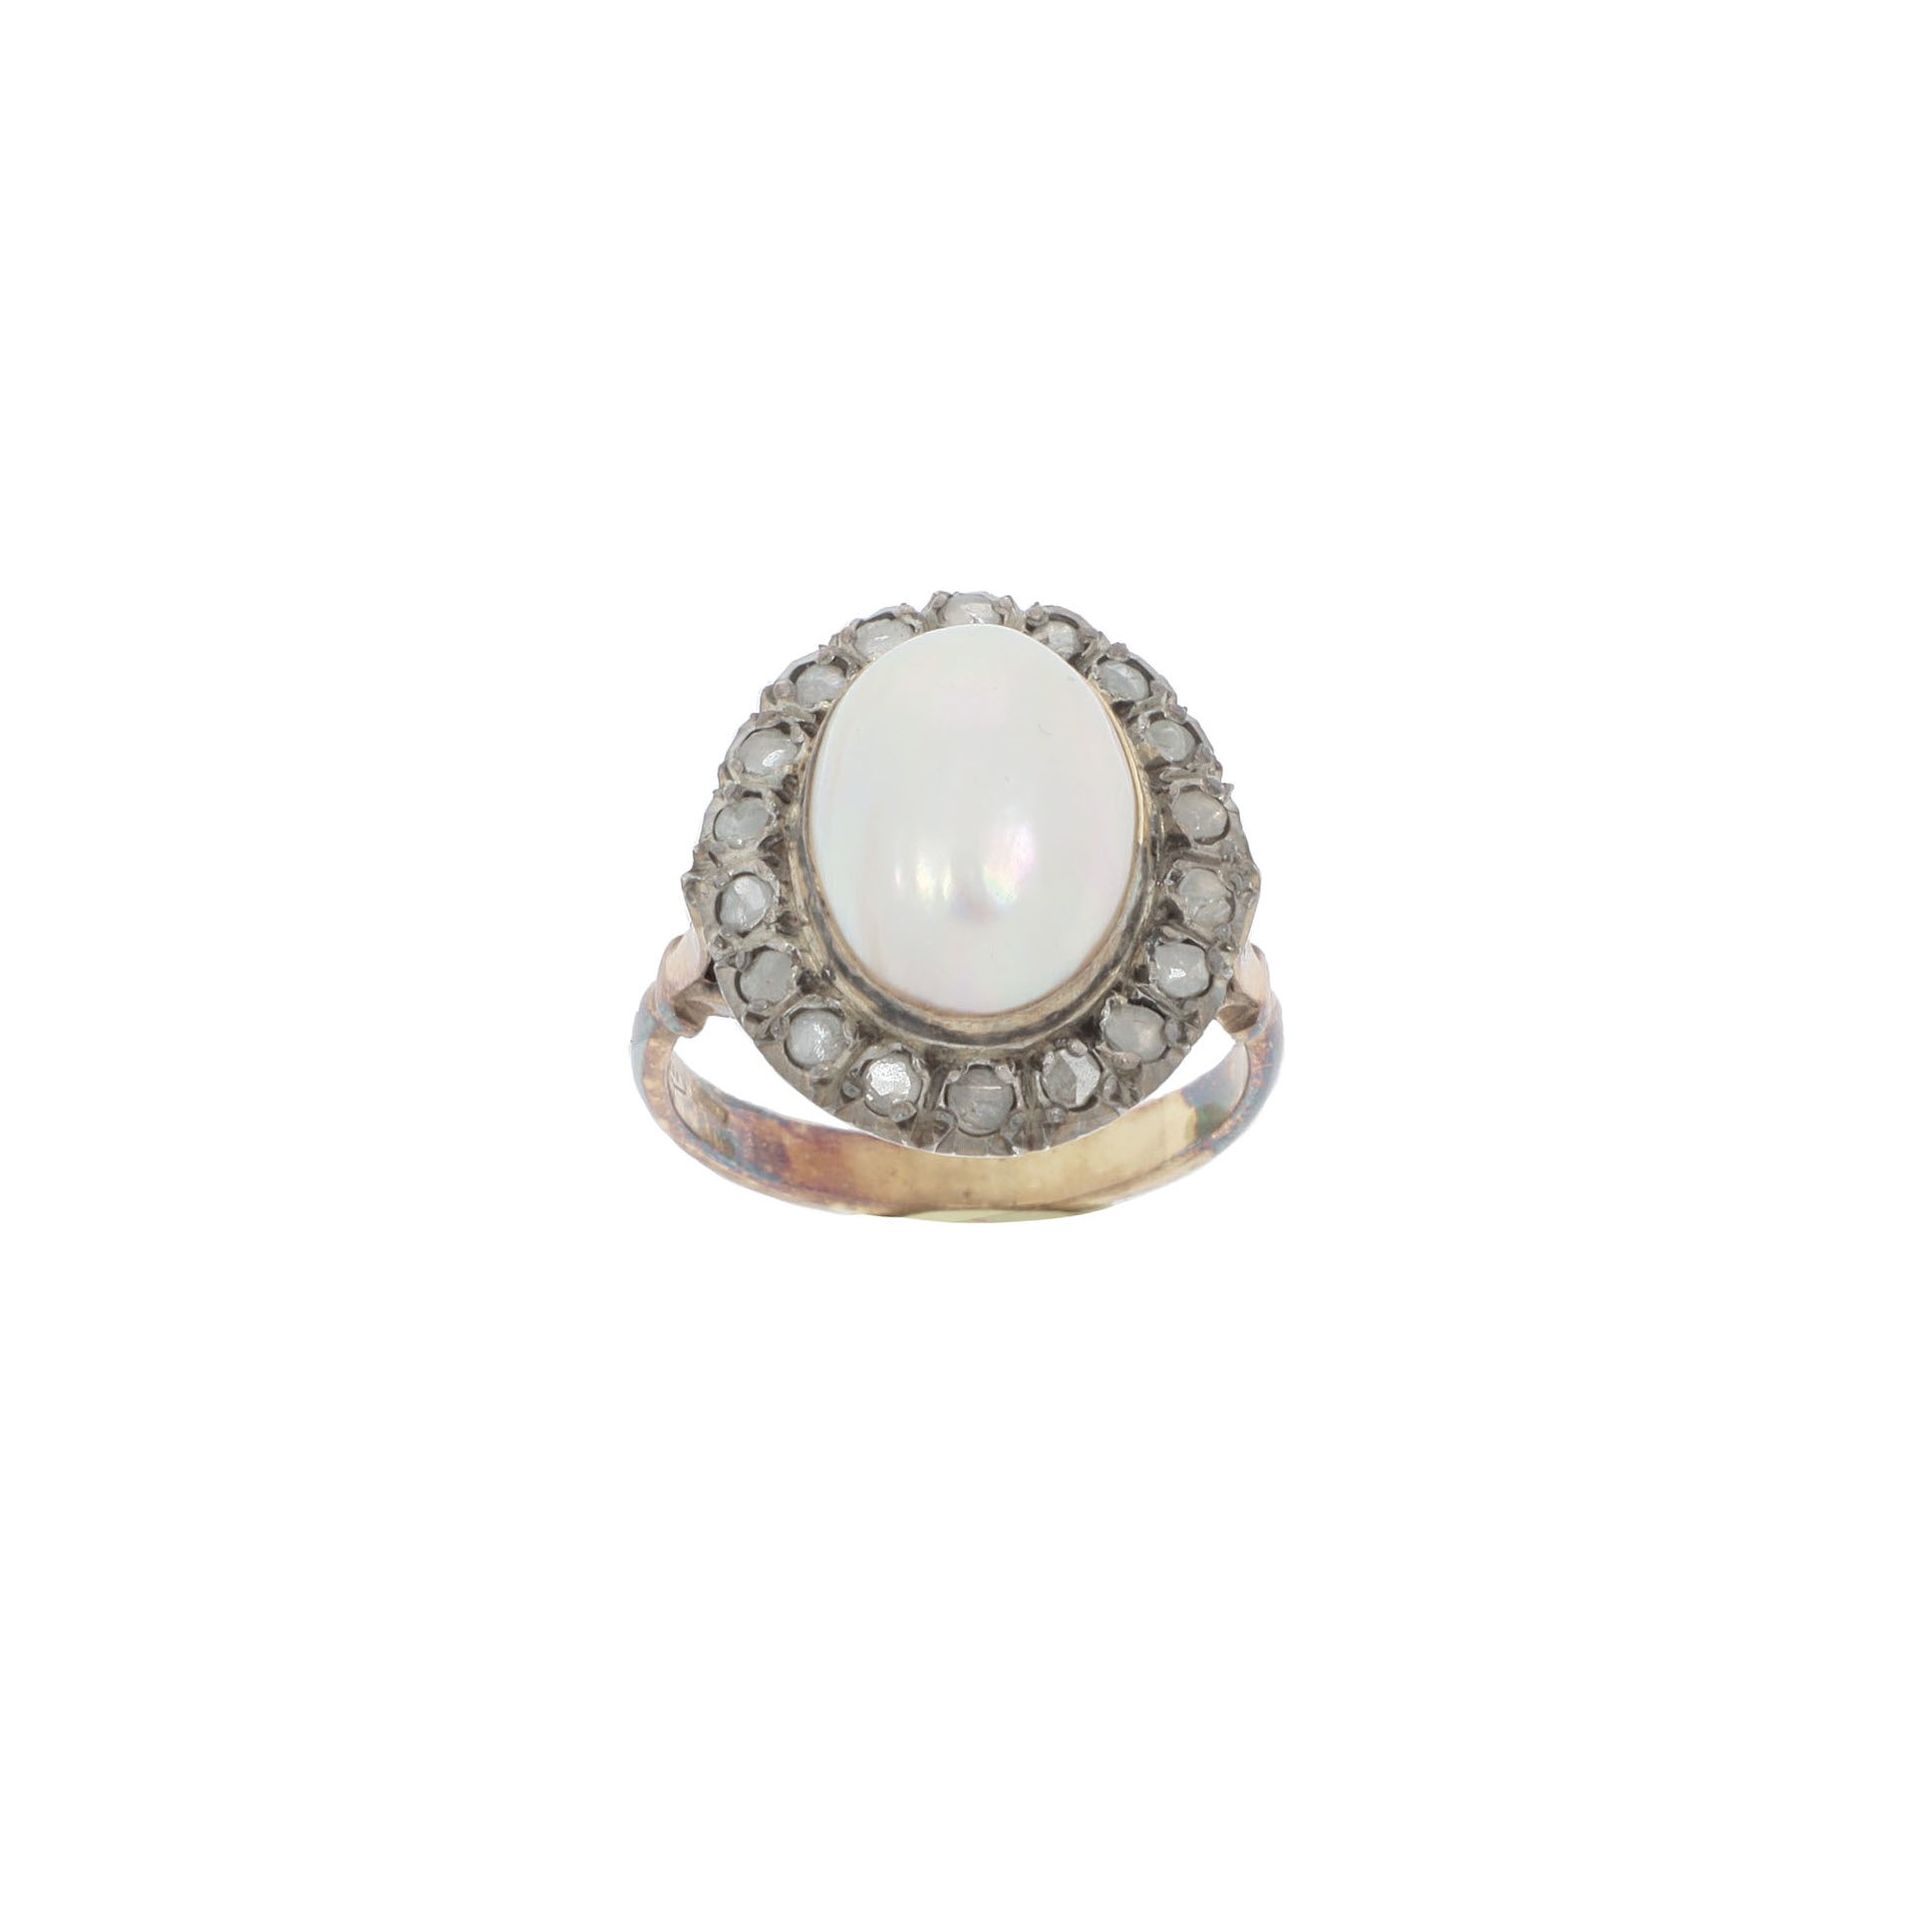 Null RING

yellow gold and silver, centered on a half pearl in a circle of diamo&hellip;